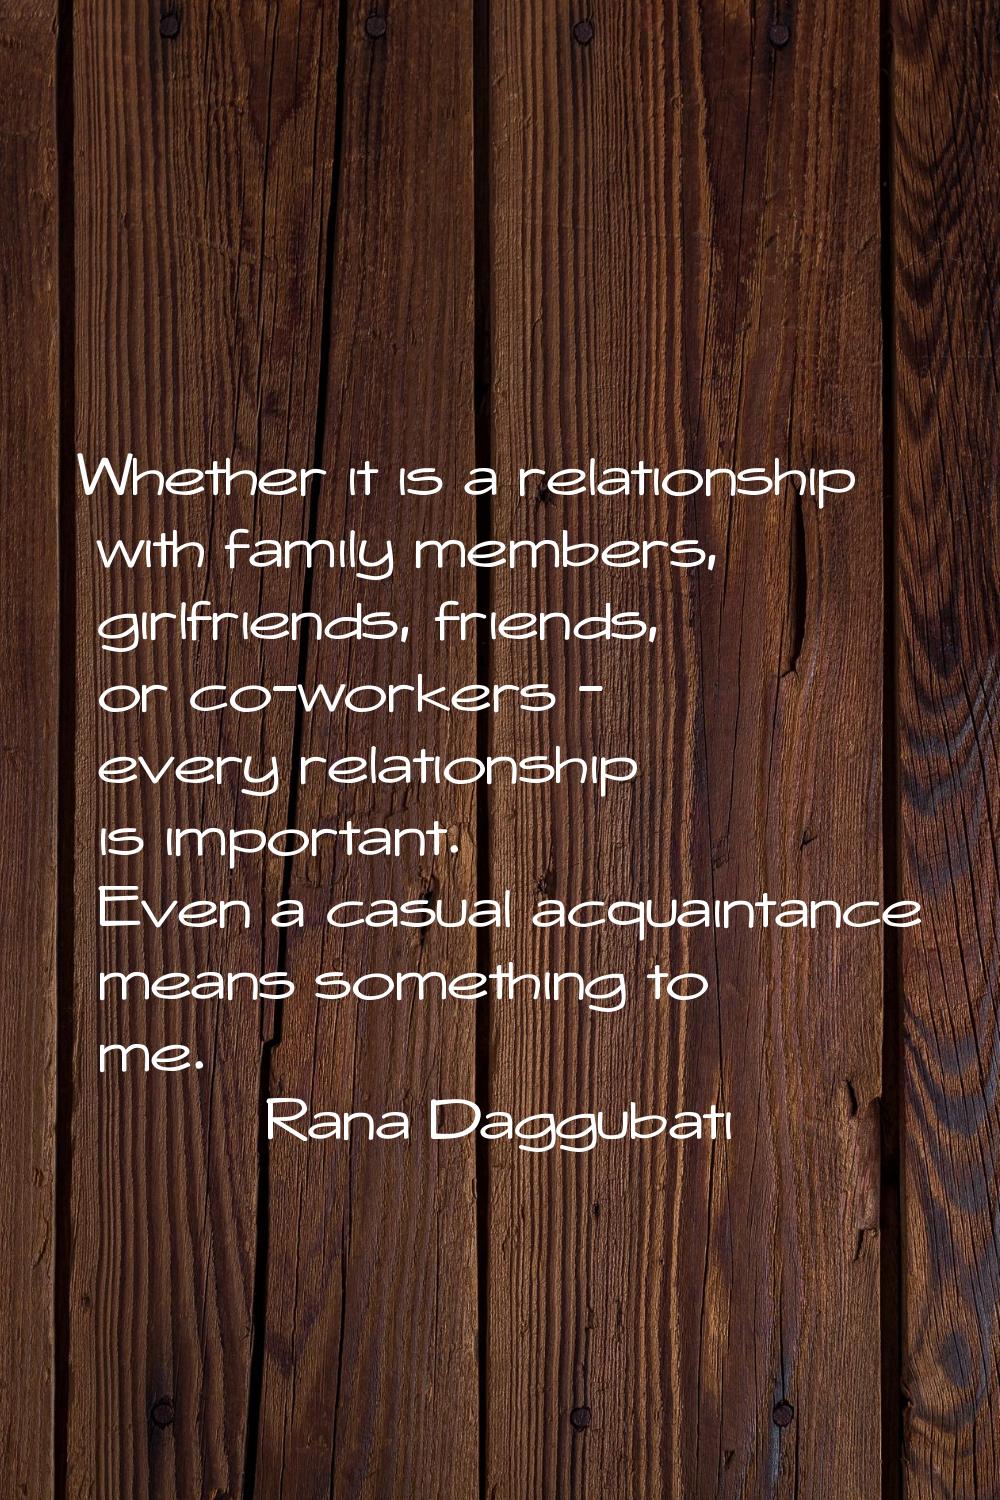 Whether it is a relationship with family members, girlfriends, friends, or co-workers - every relat